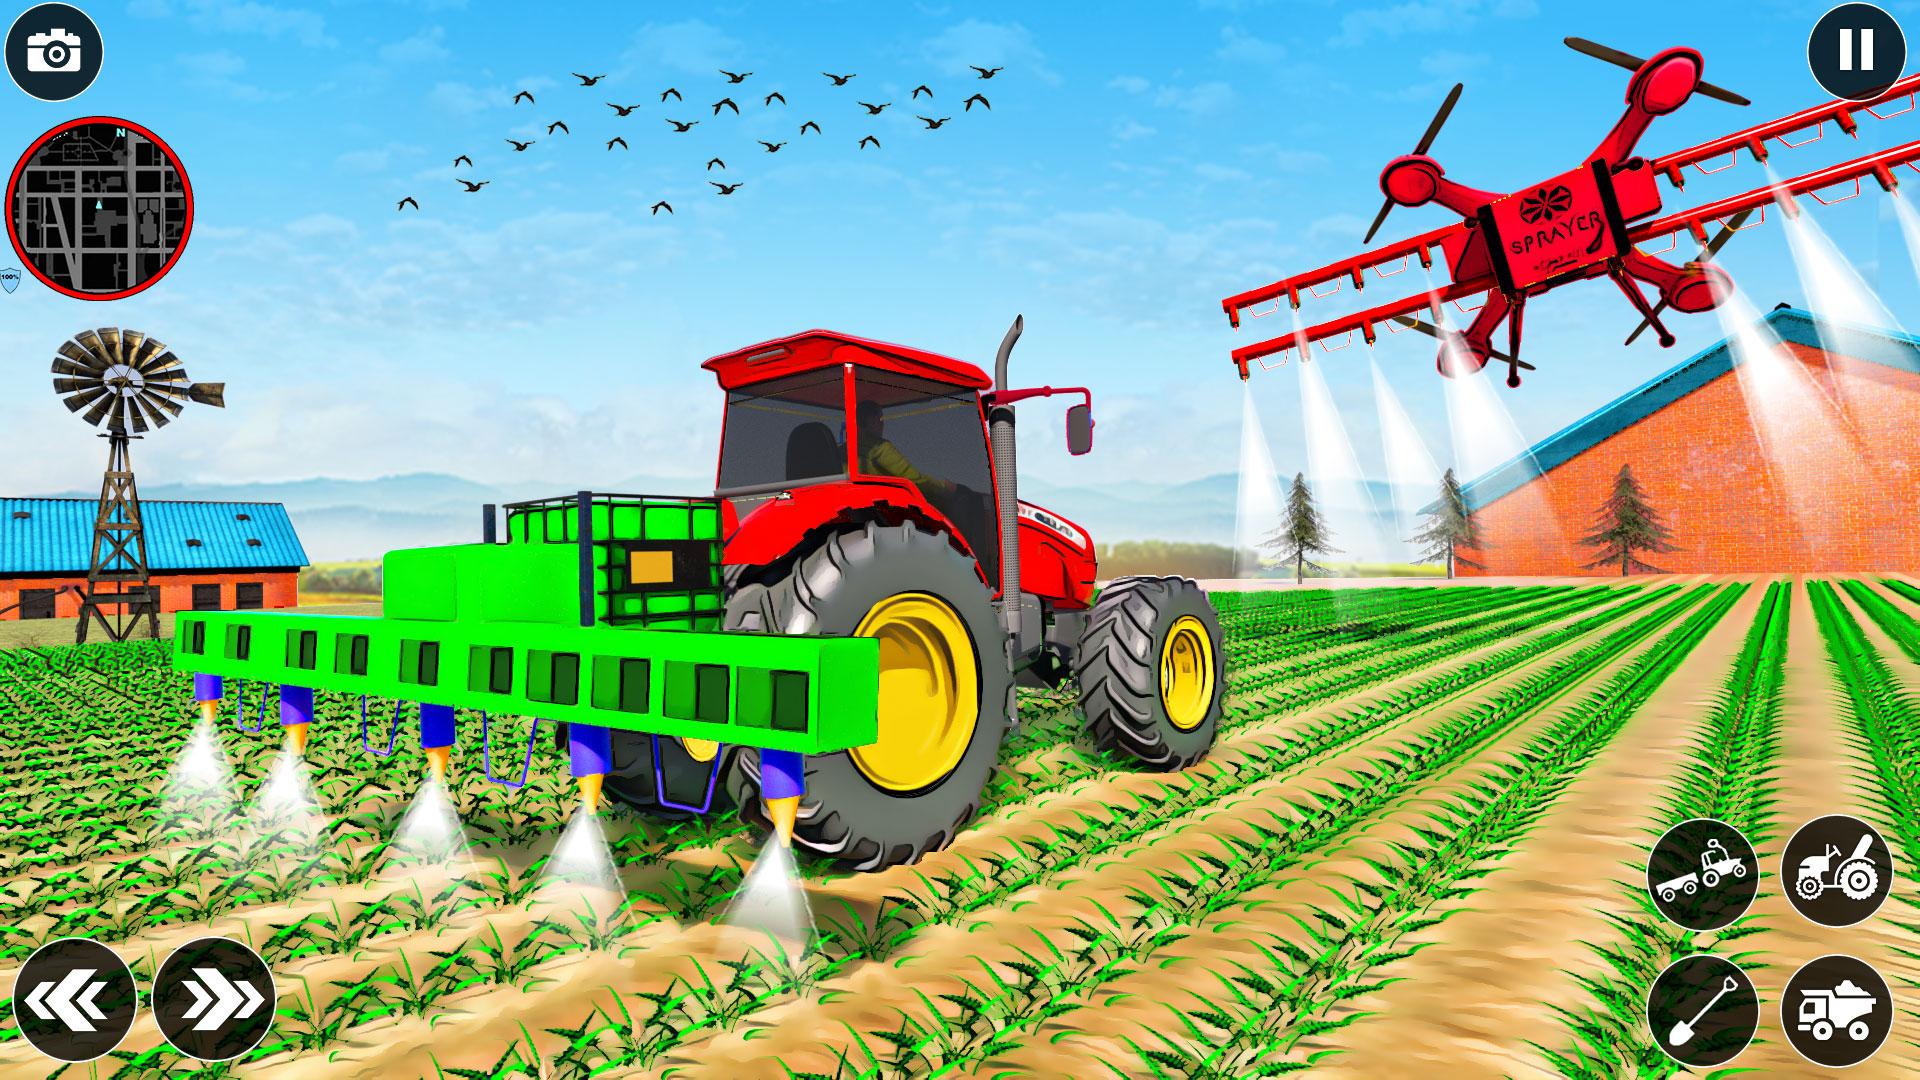 Tractor from the Hill PNG. Игра тракторы зеленые